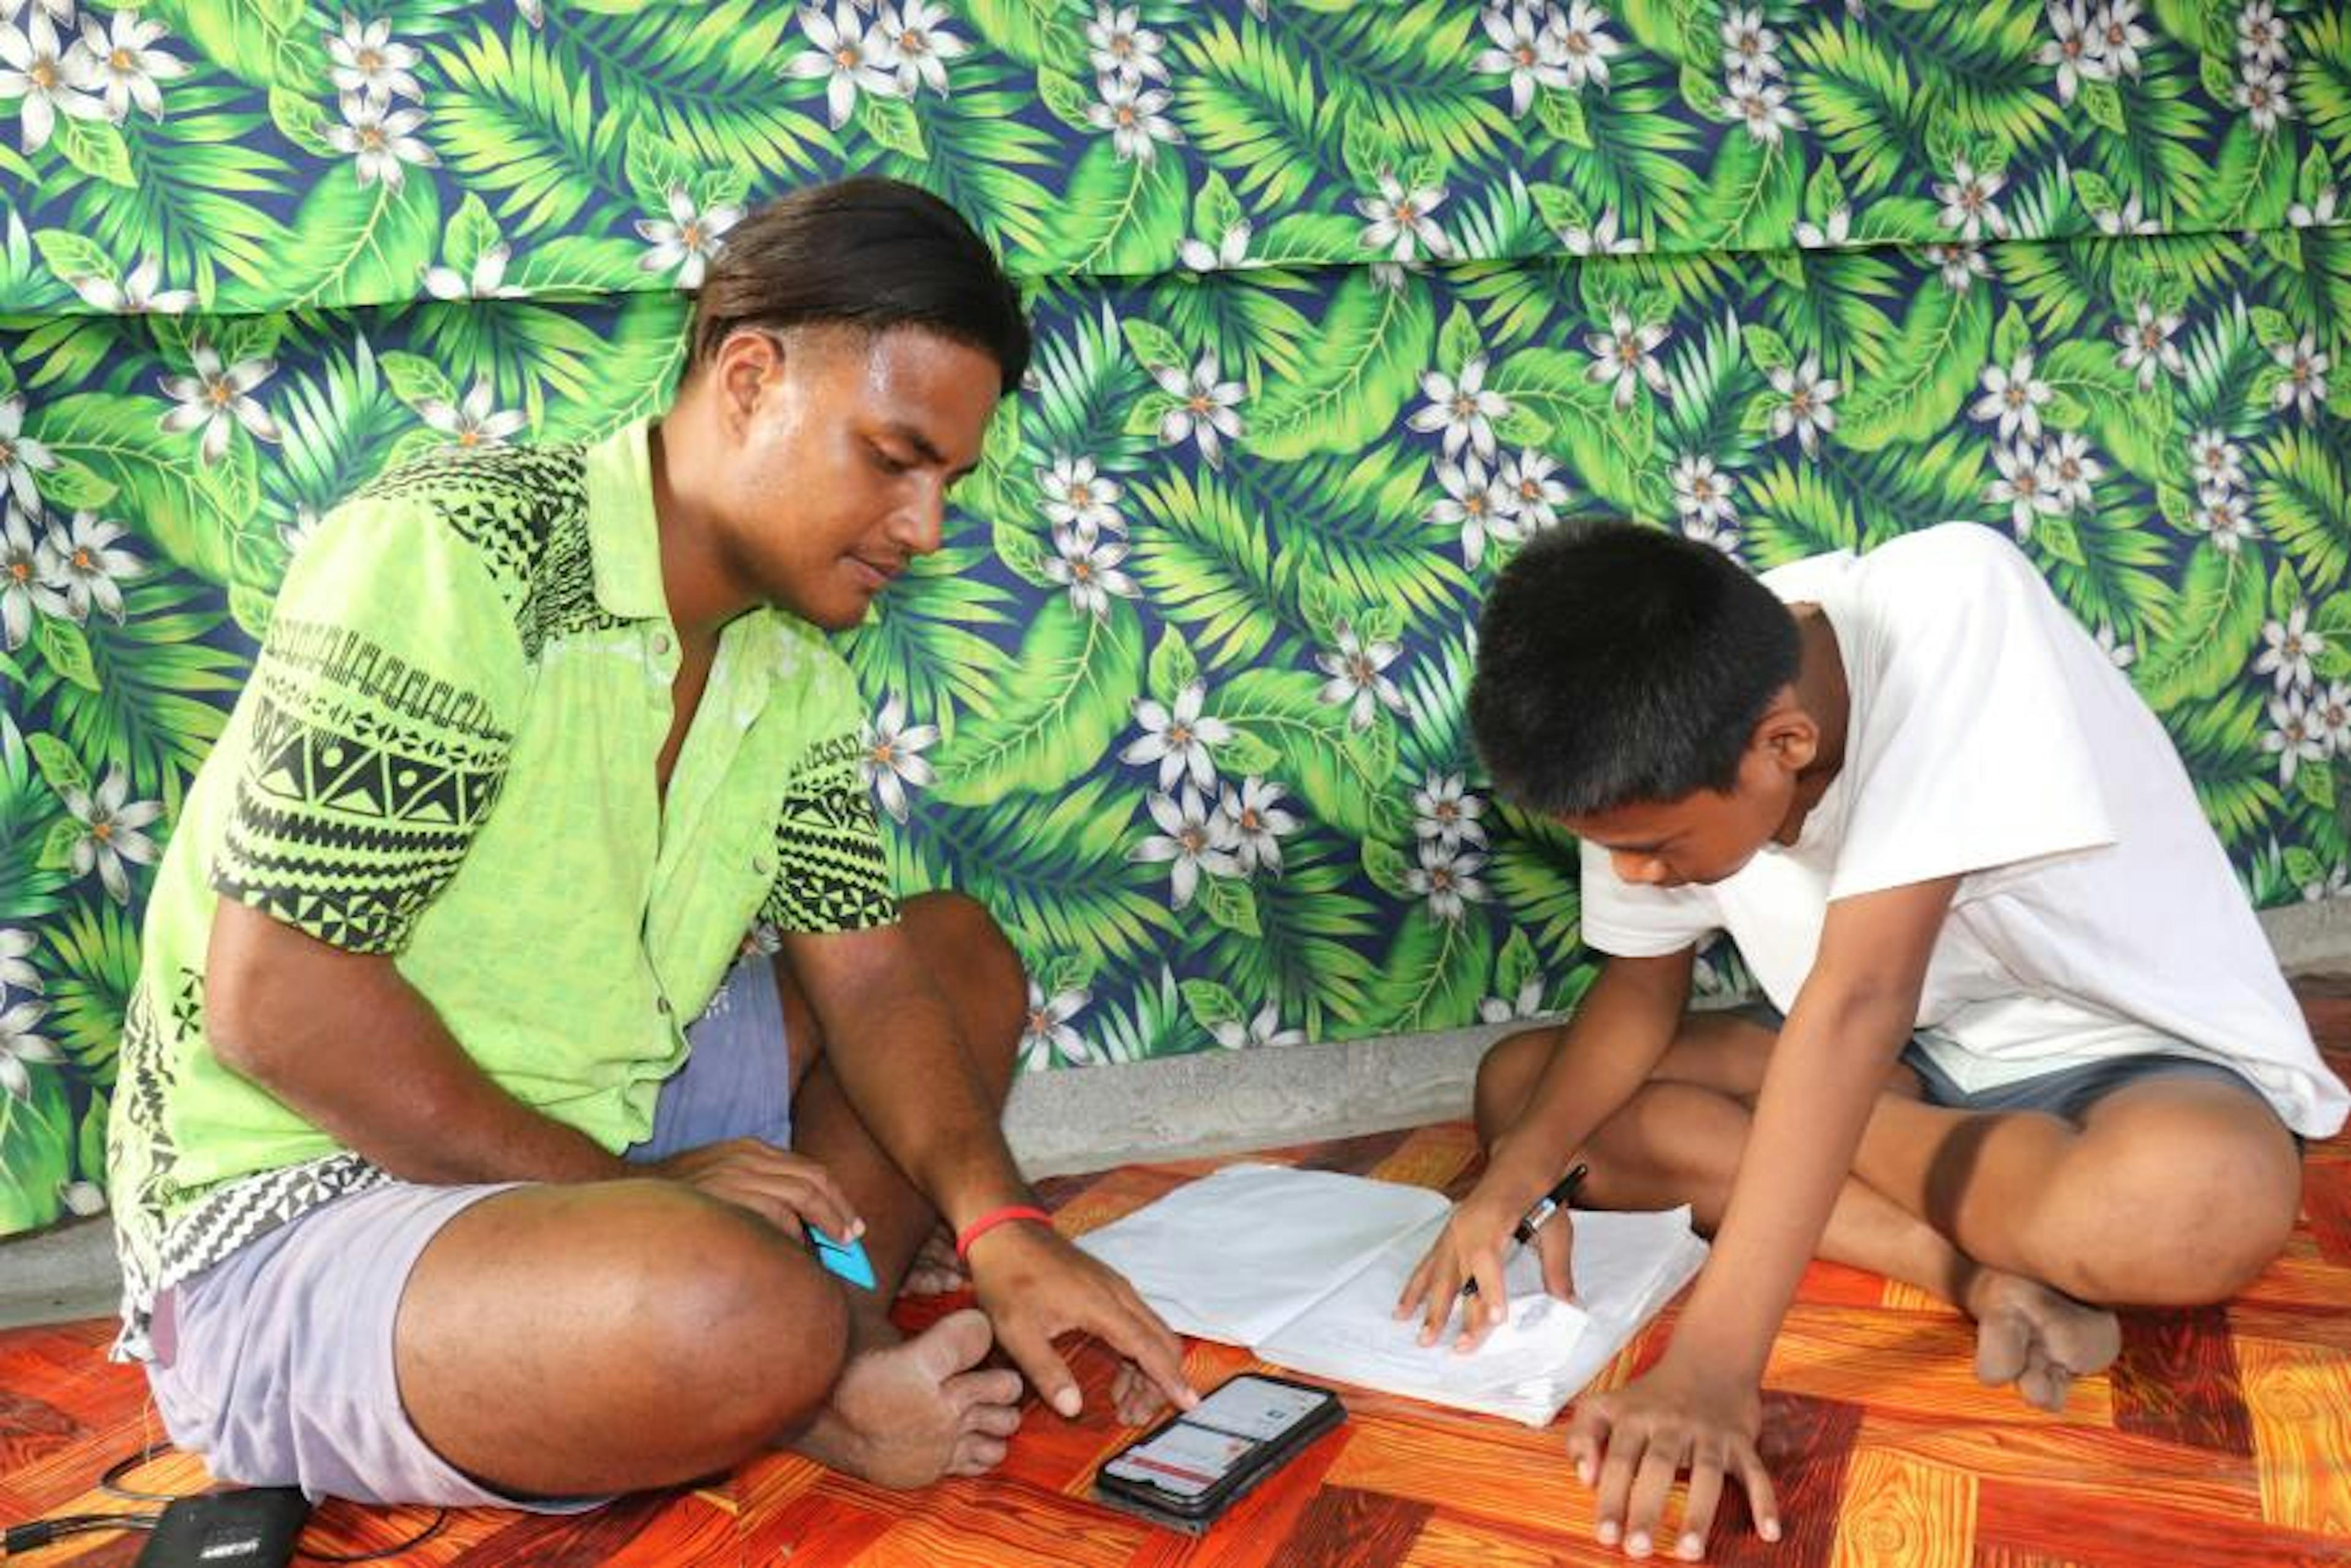 Betangnga’s uncle helps him with math problems about the perimeter of compound shapes in Learning Passport lessons.